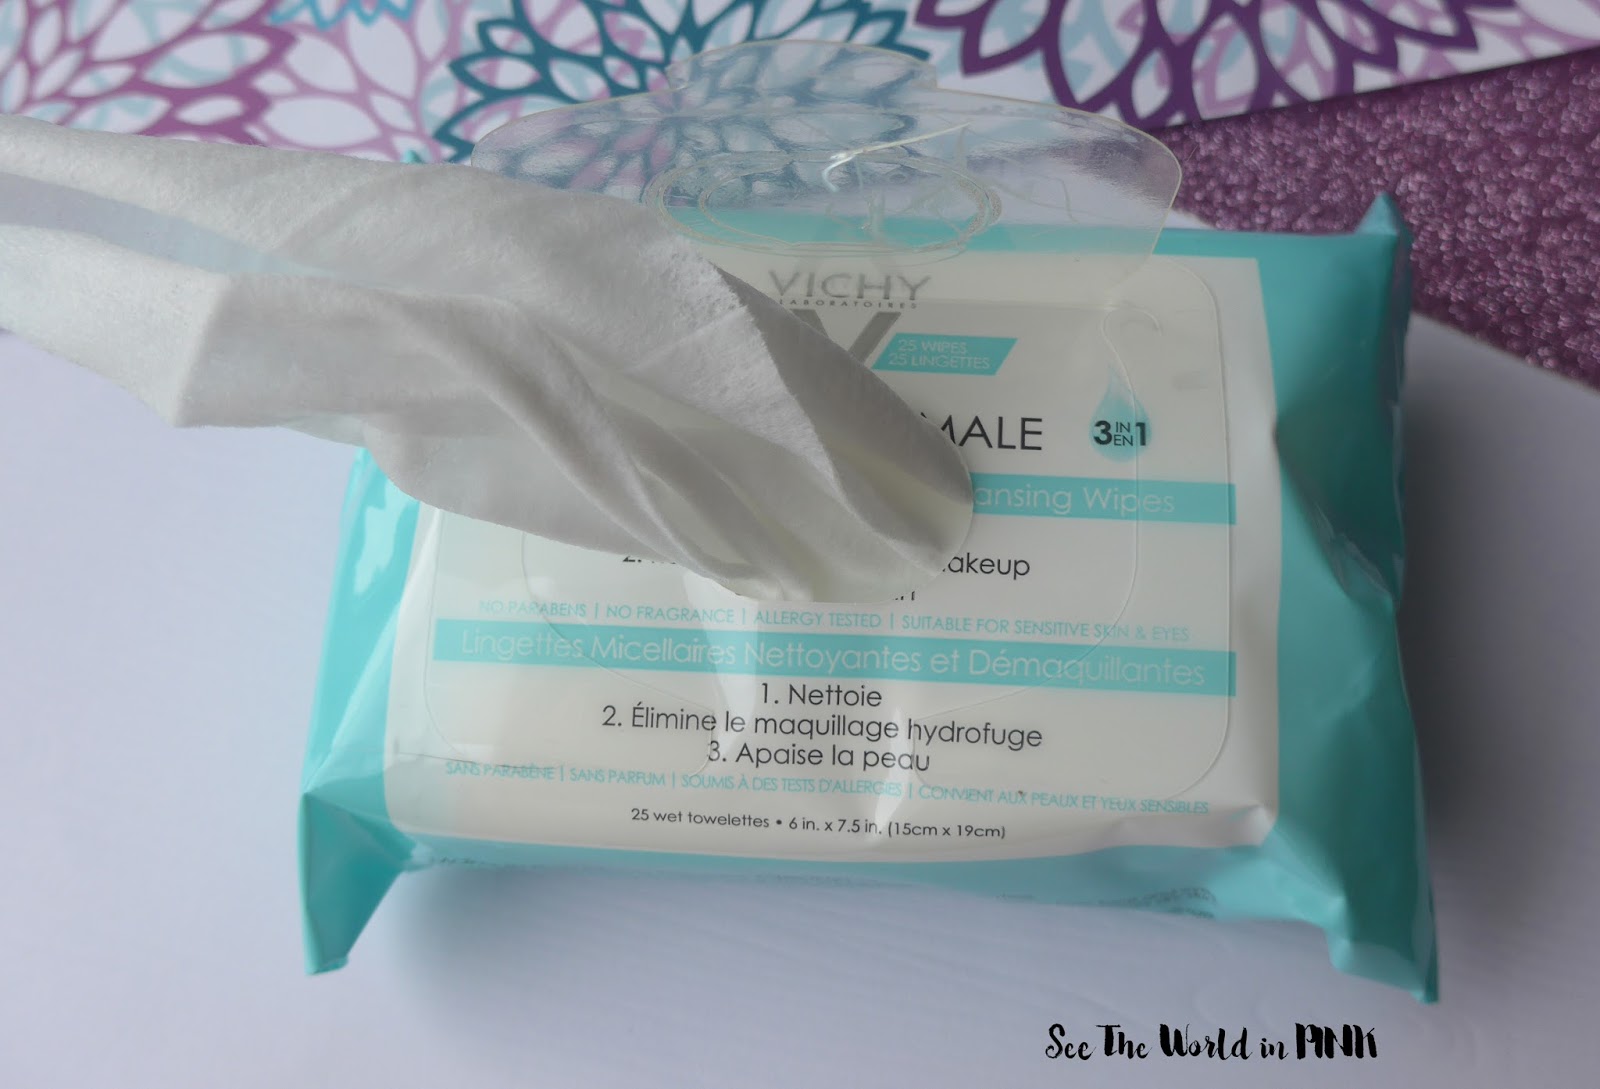 Skincare Sunday - Vichy Makeup Removing Micellar Cleansing Wipes Review